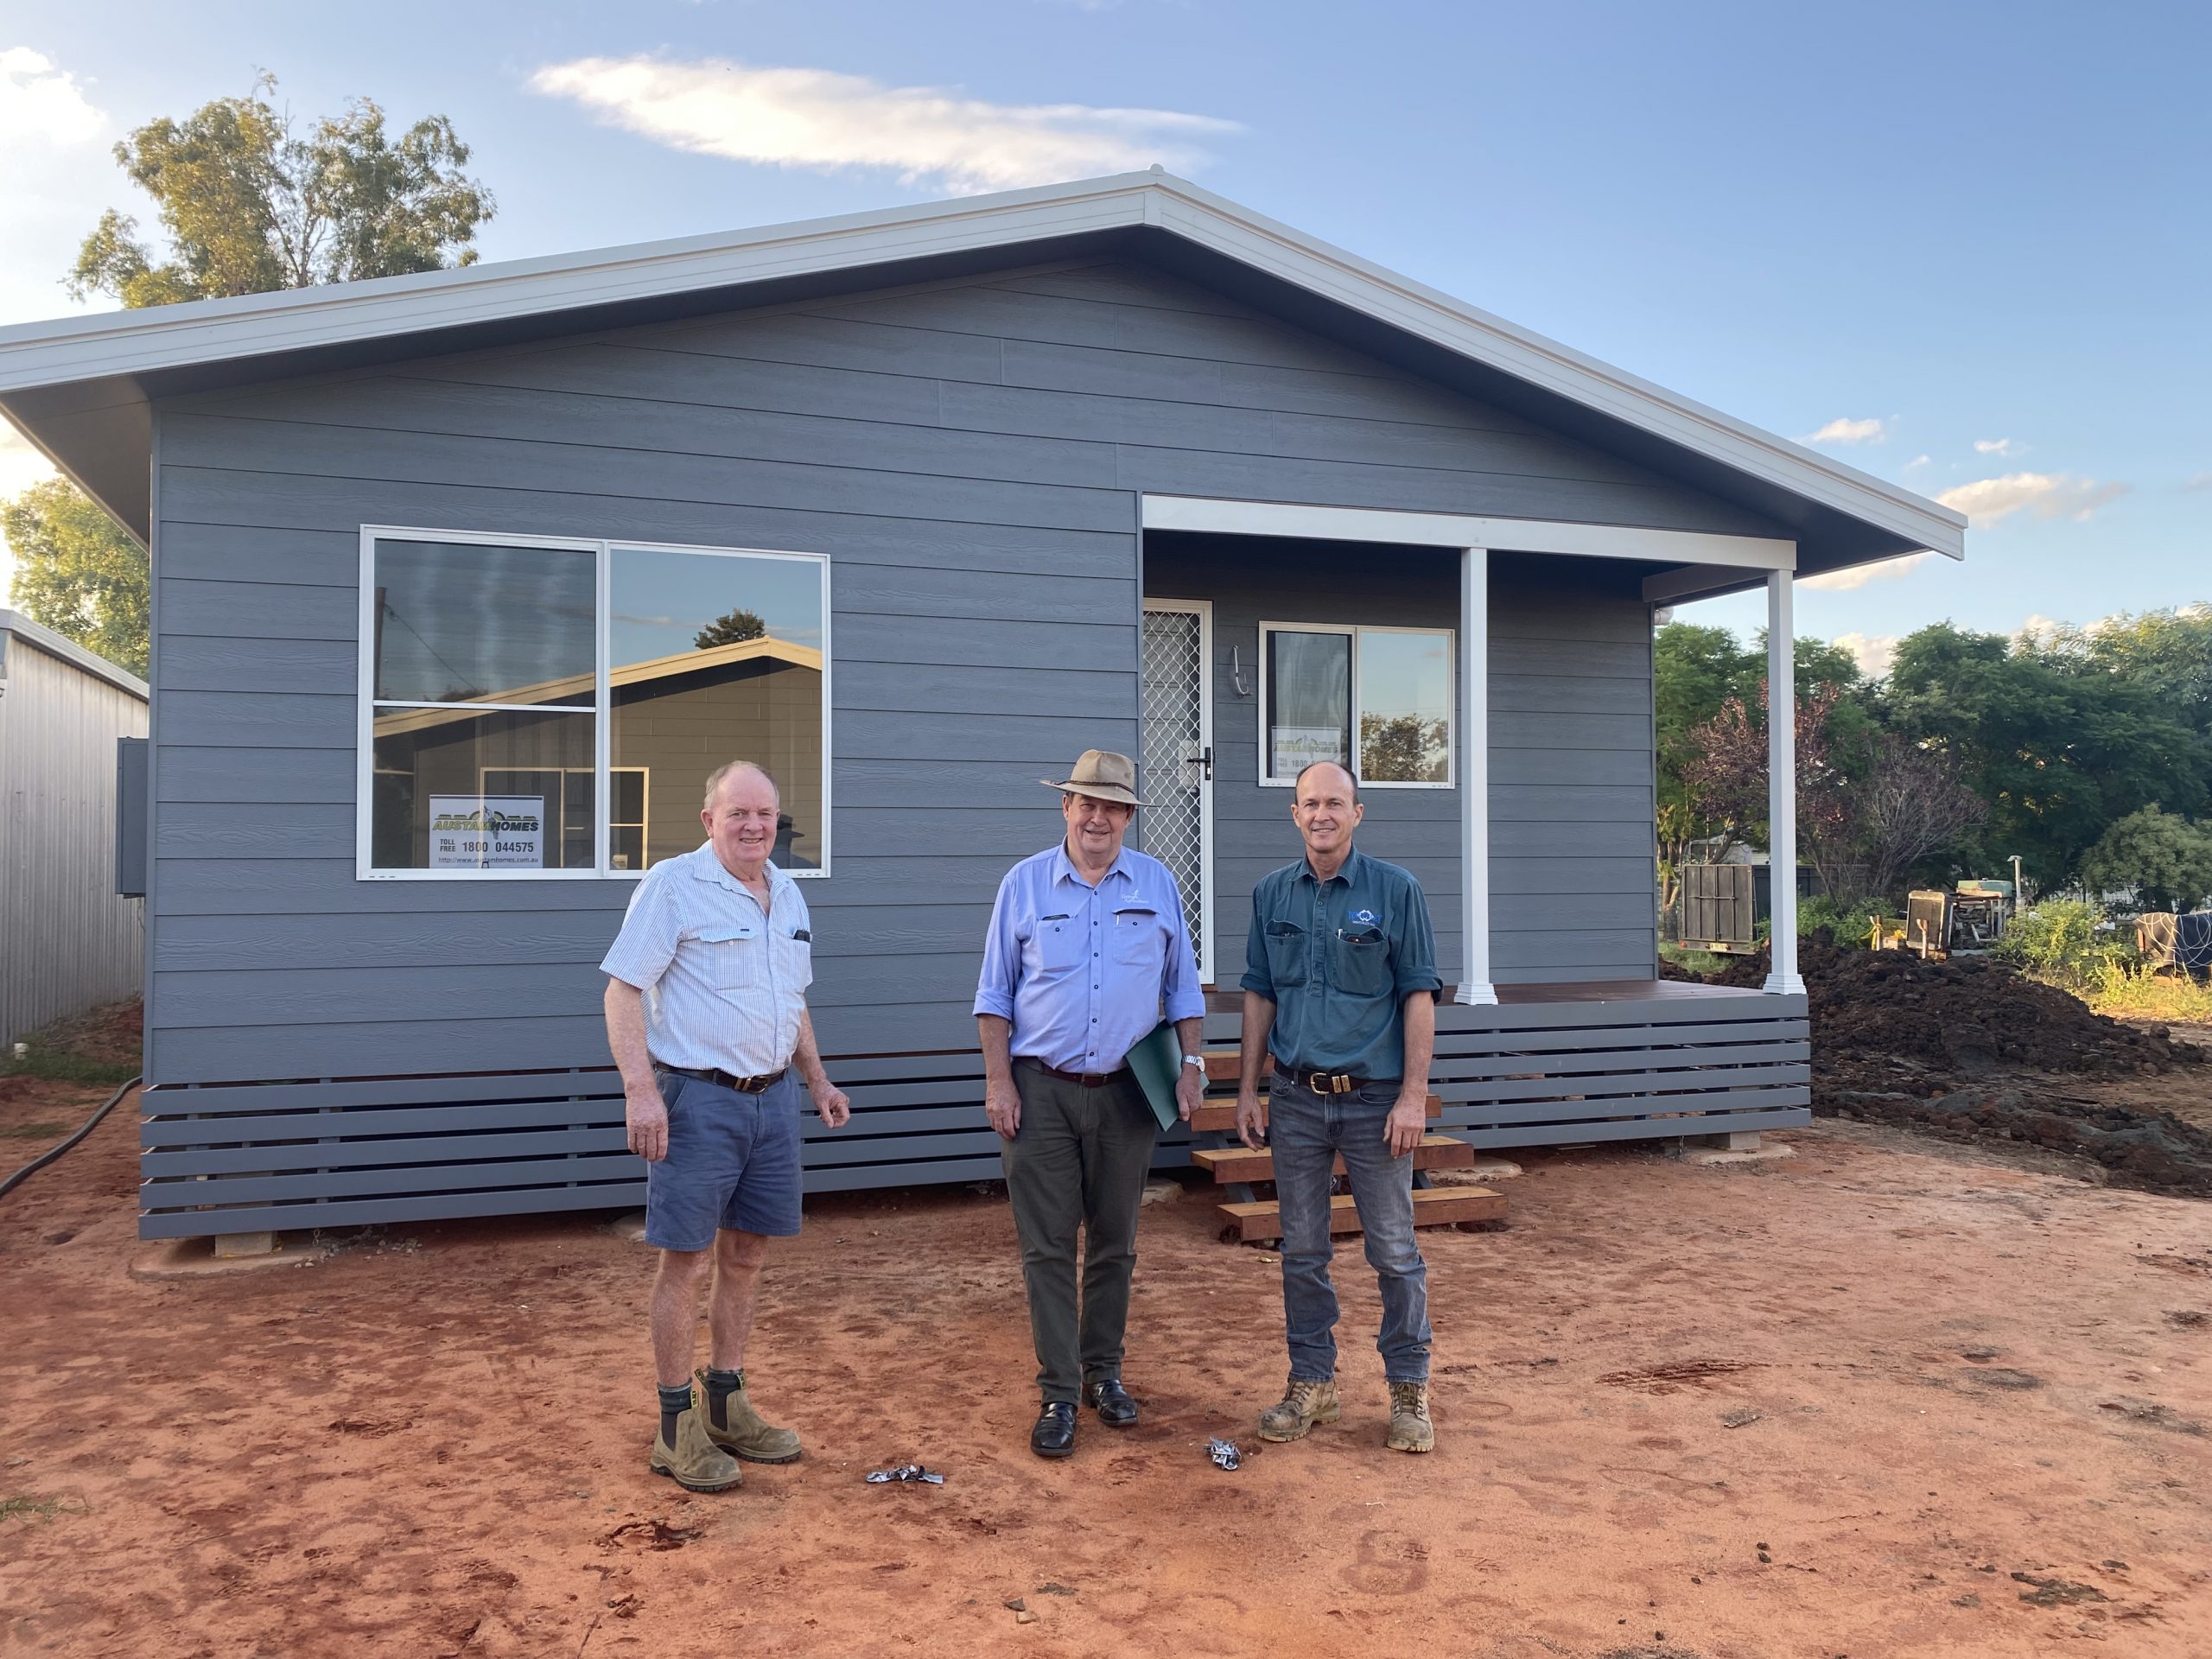 Health housing for medical professionals arrives in Wee Waa